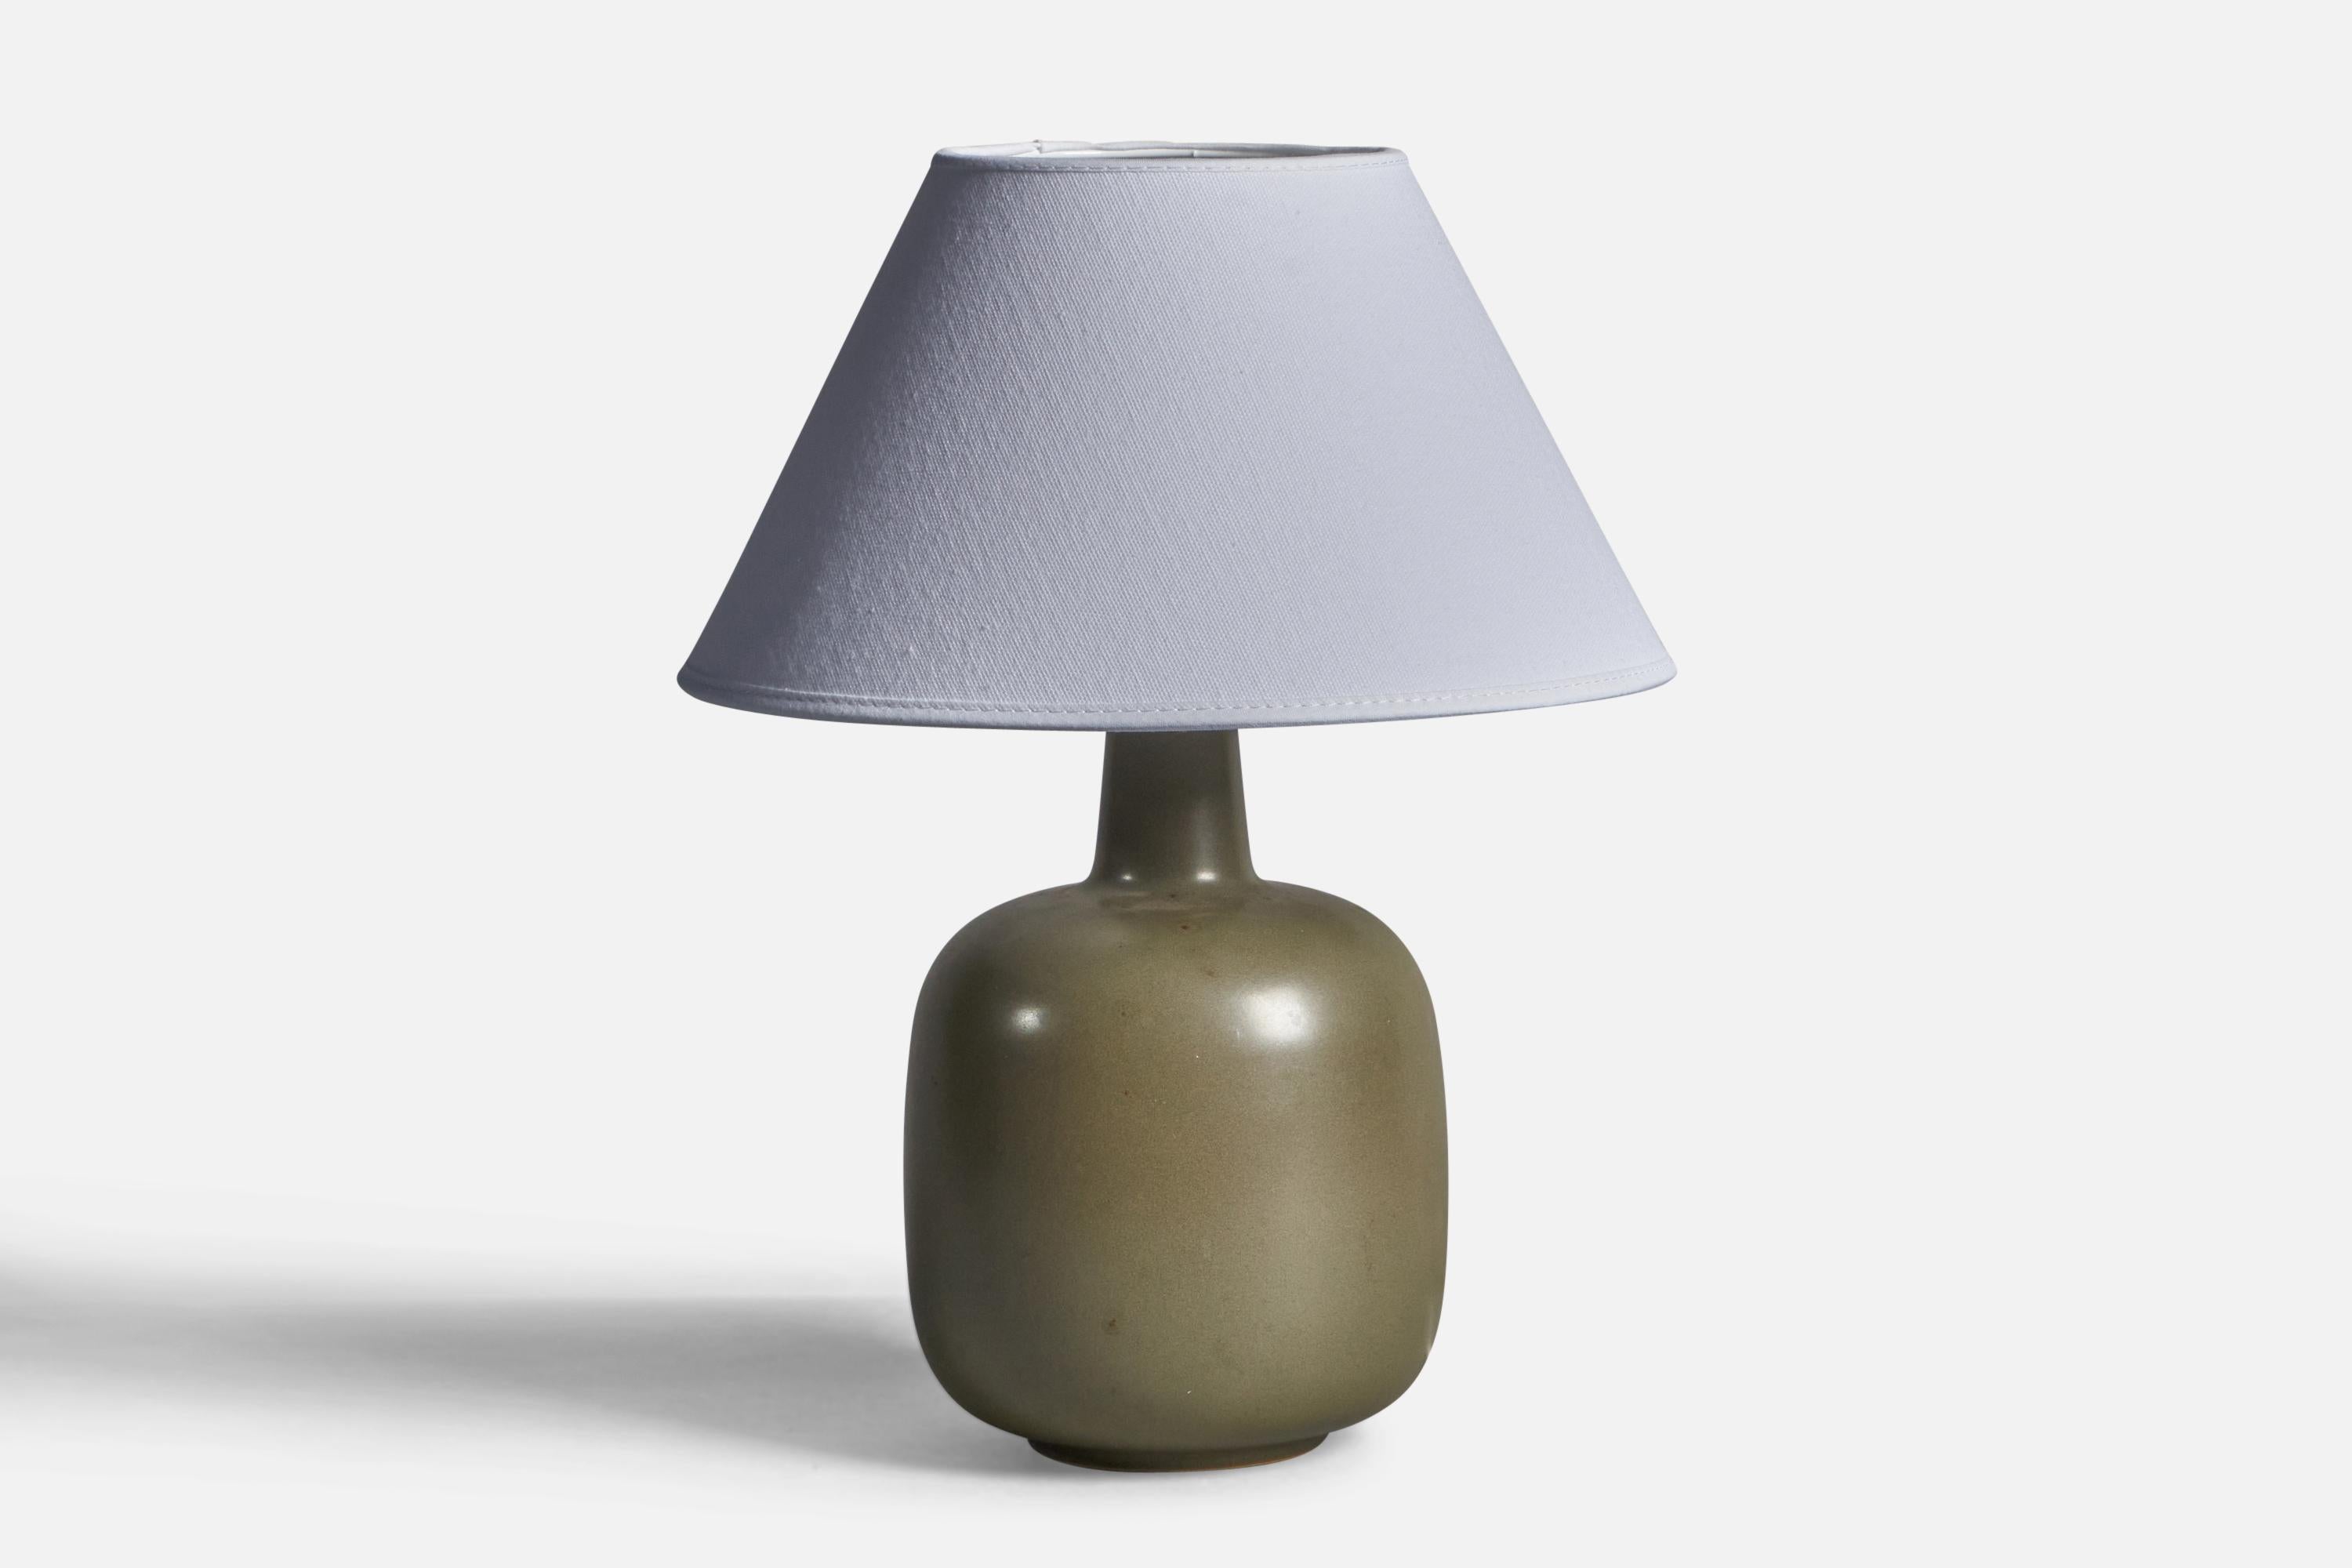 A green-glazed stoneware table lamp, designed and produced in Sweden, c. 1960s.

Dimensions of Lamp (inches): 10